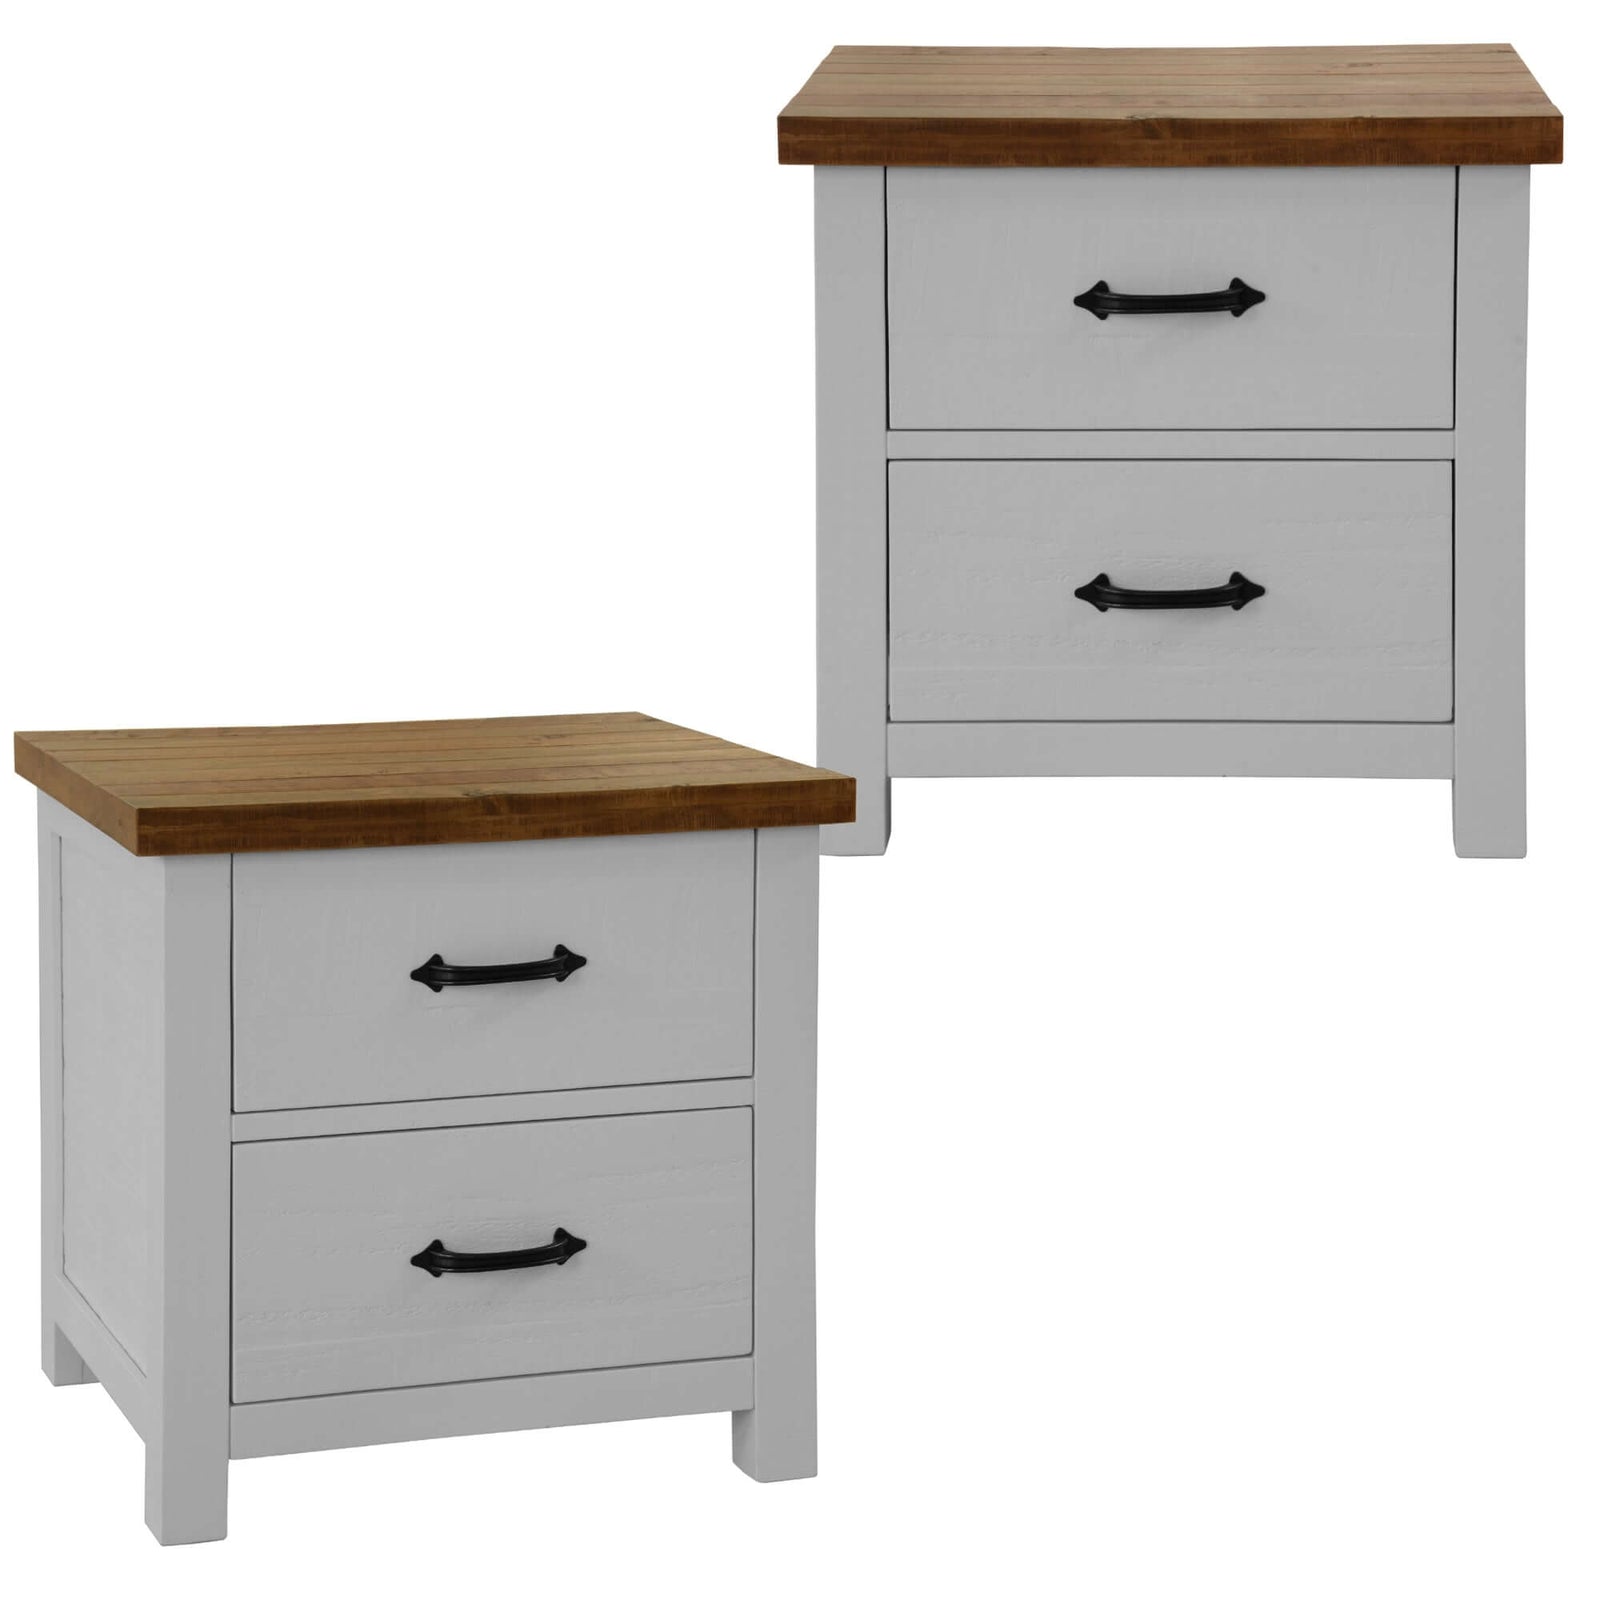 Grandy Set of 2 Bedside Table 2 Drawers Storage Cabinet Nightstand White Brown-Upinteriors